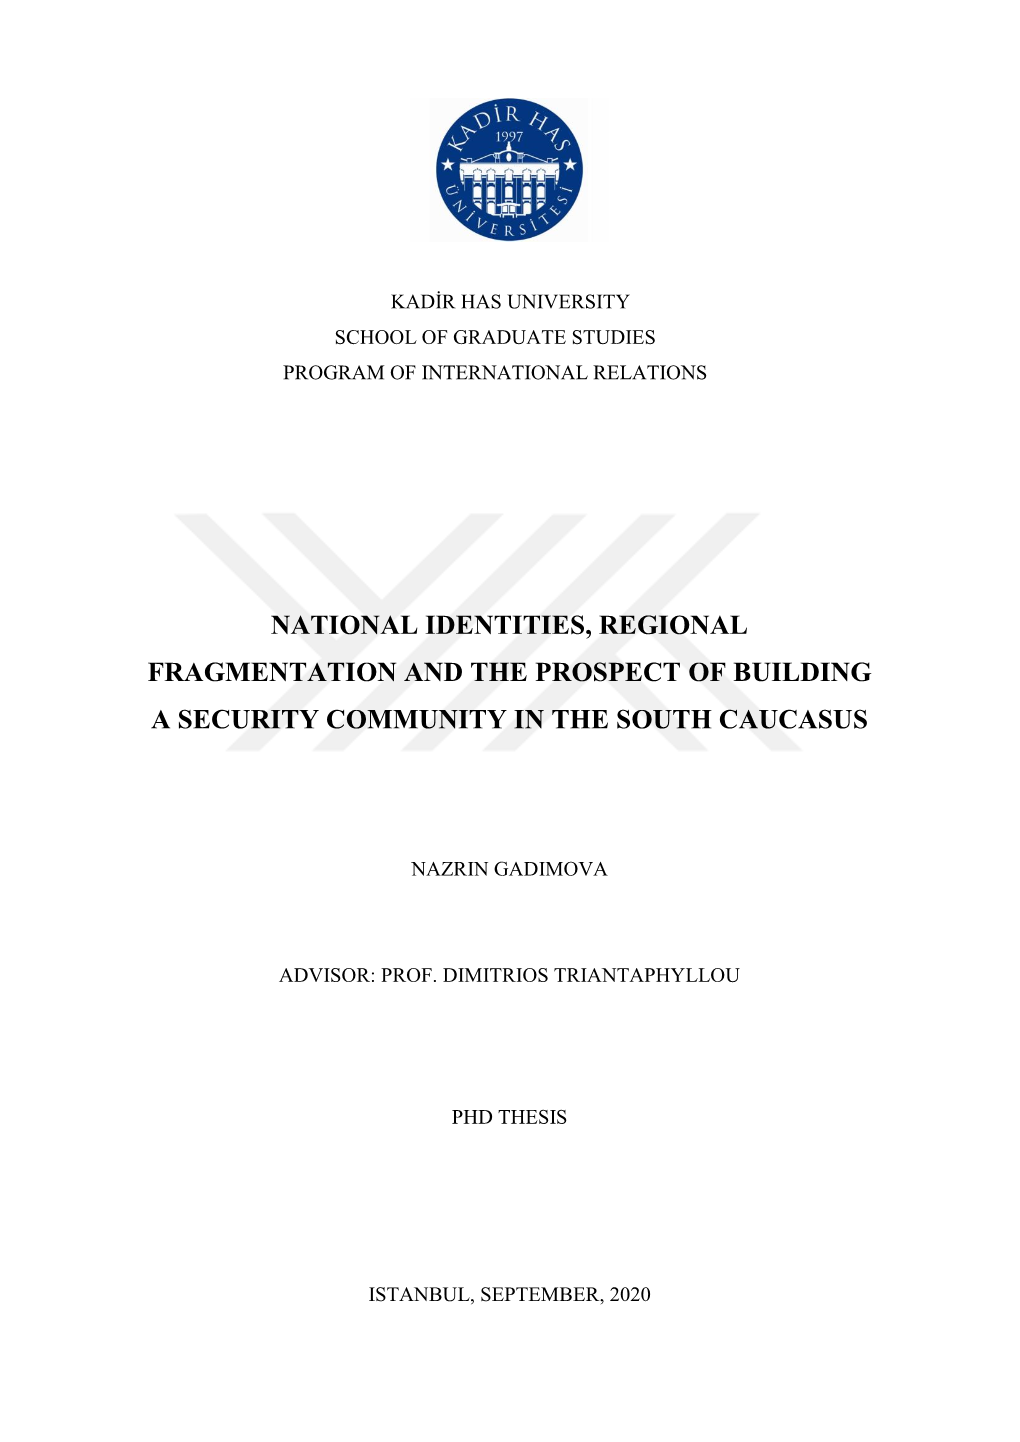 National Identities, Regional Fragmentation and the Prospect of Building a Security Community in the South Caucasus